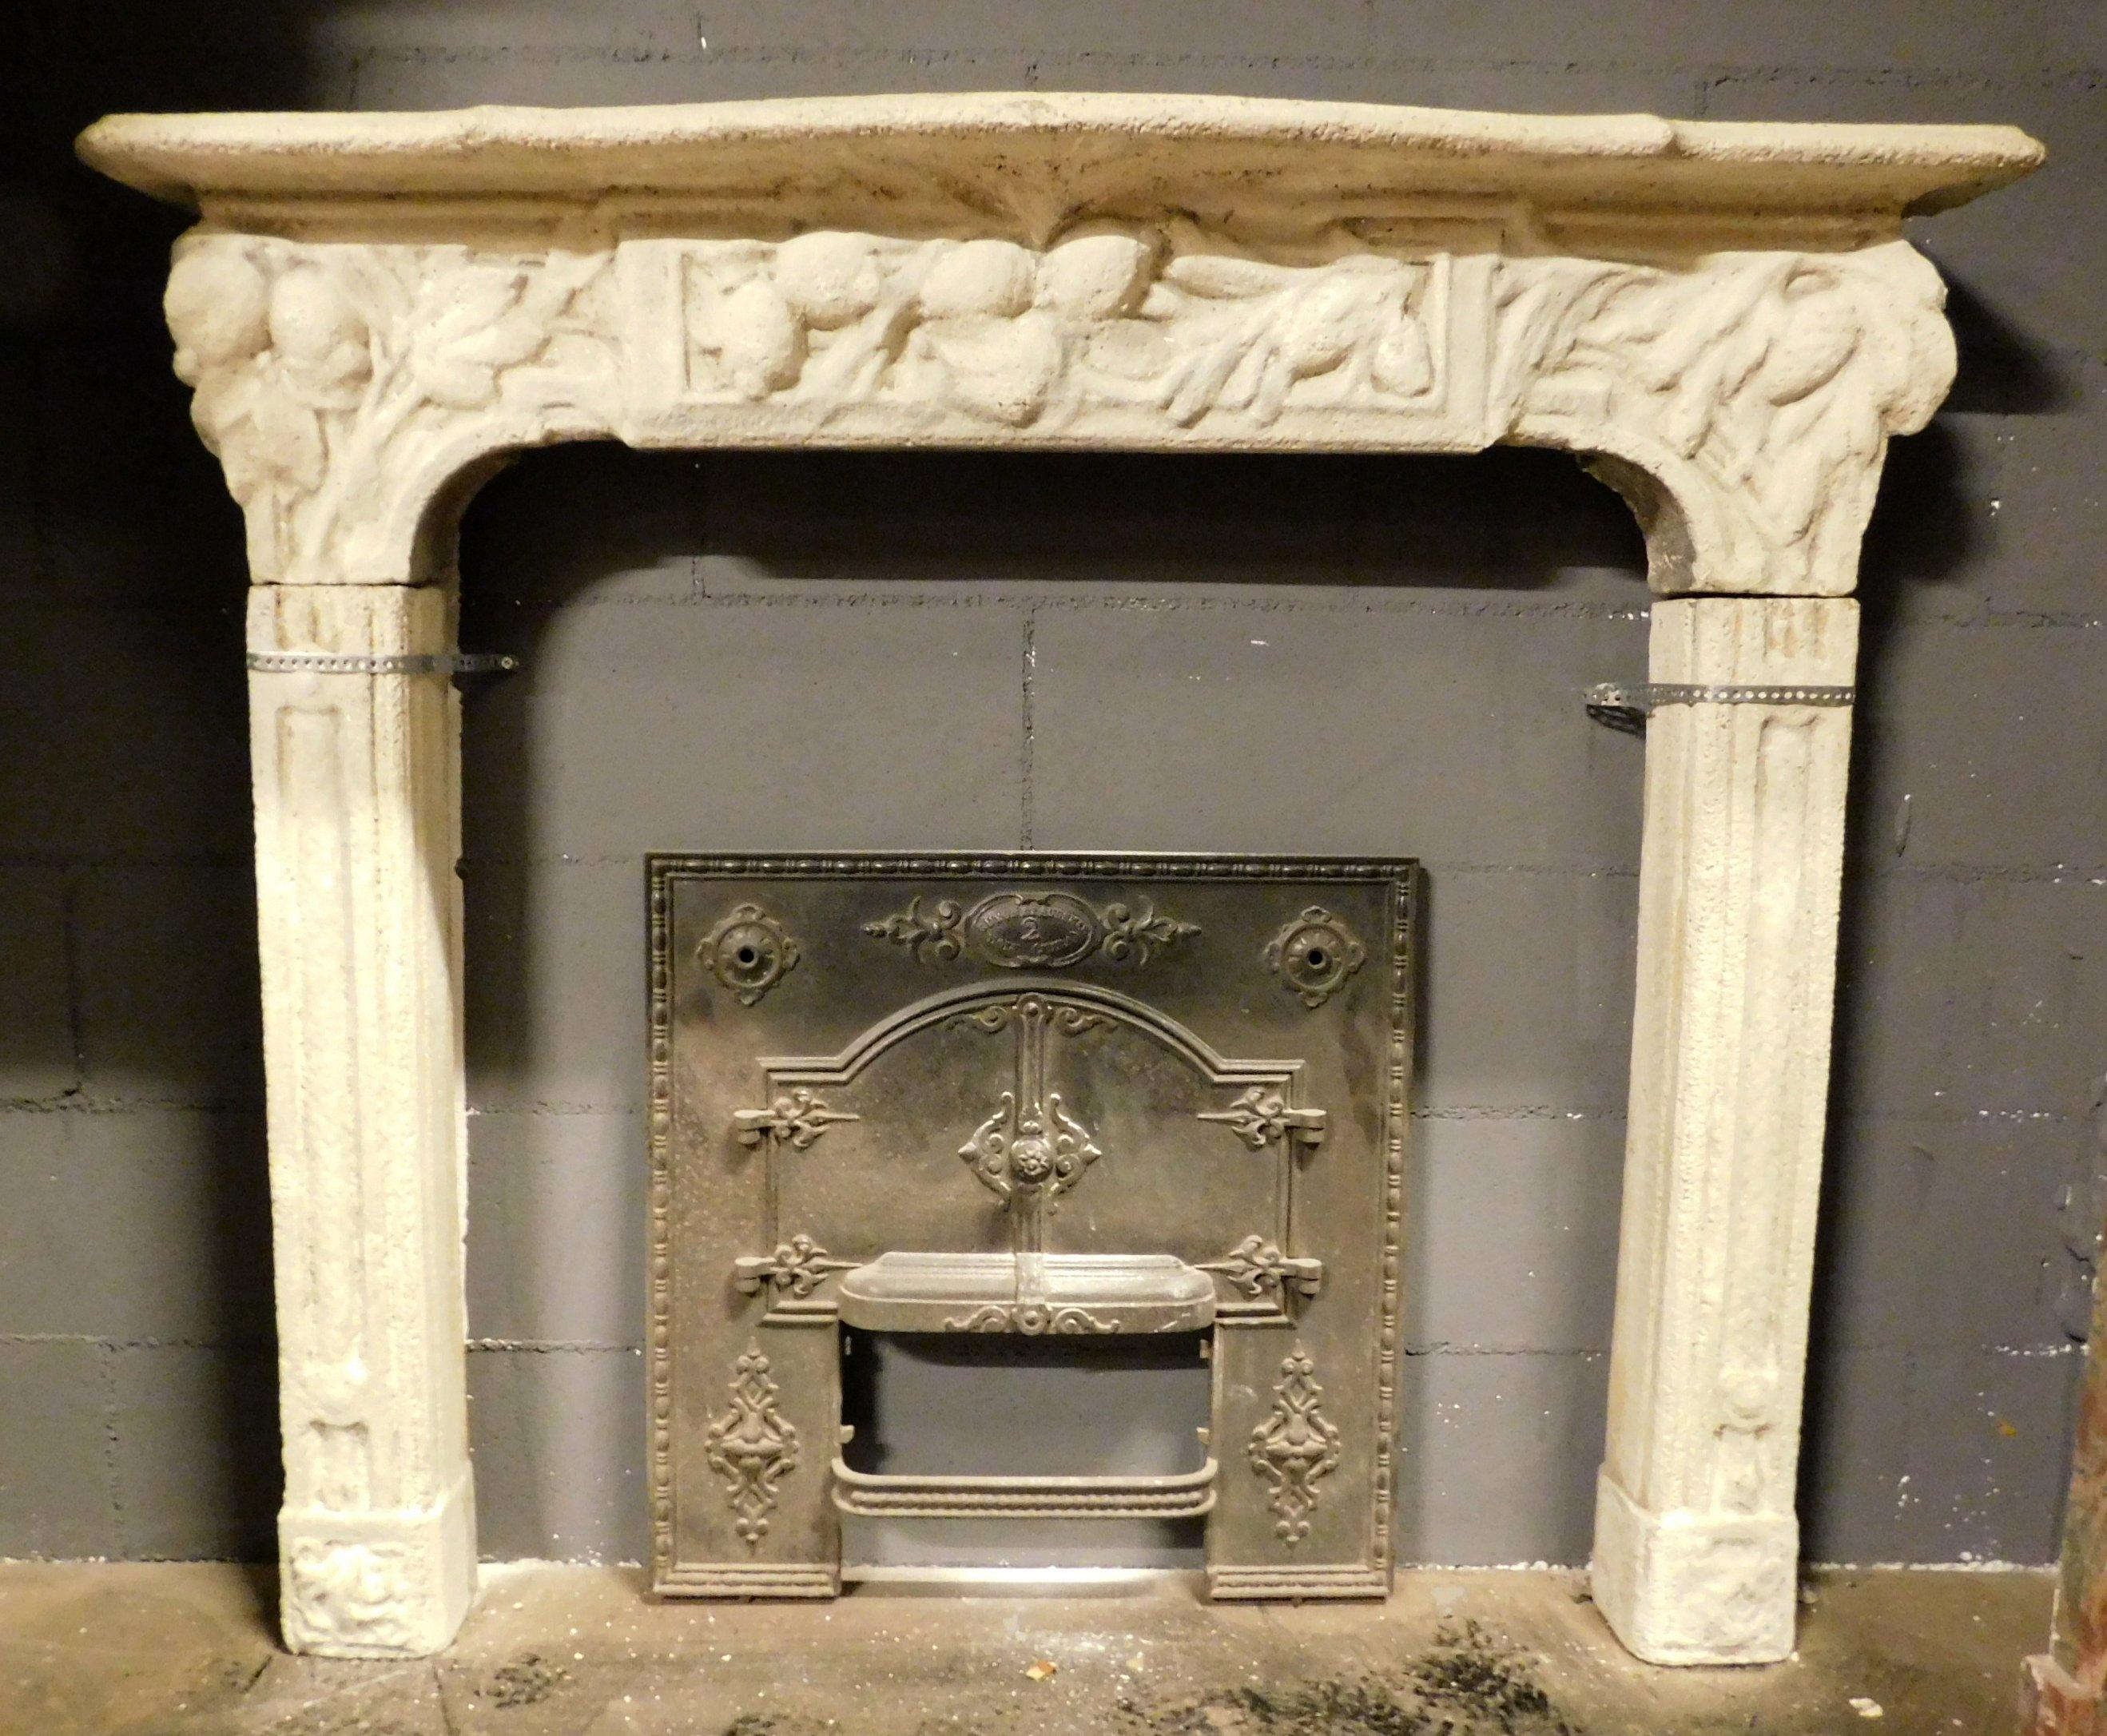 Antique fireplace mantel hand-carved in beige colored concrete, carved with floral shapes and cornucopias, produced by an artisan at the beginning of the 20th century in Italy.
Charming and discreet, ideal for enriching the warmth of your interior,